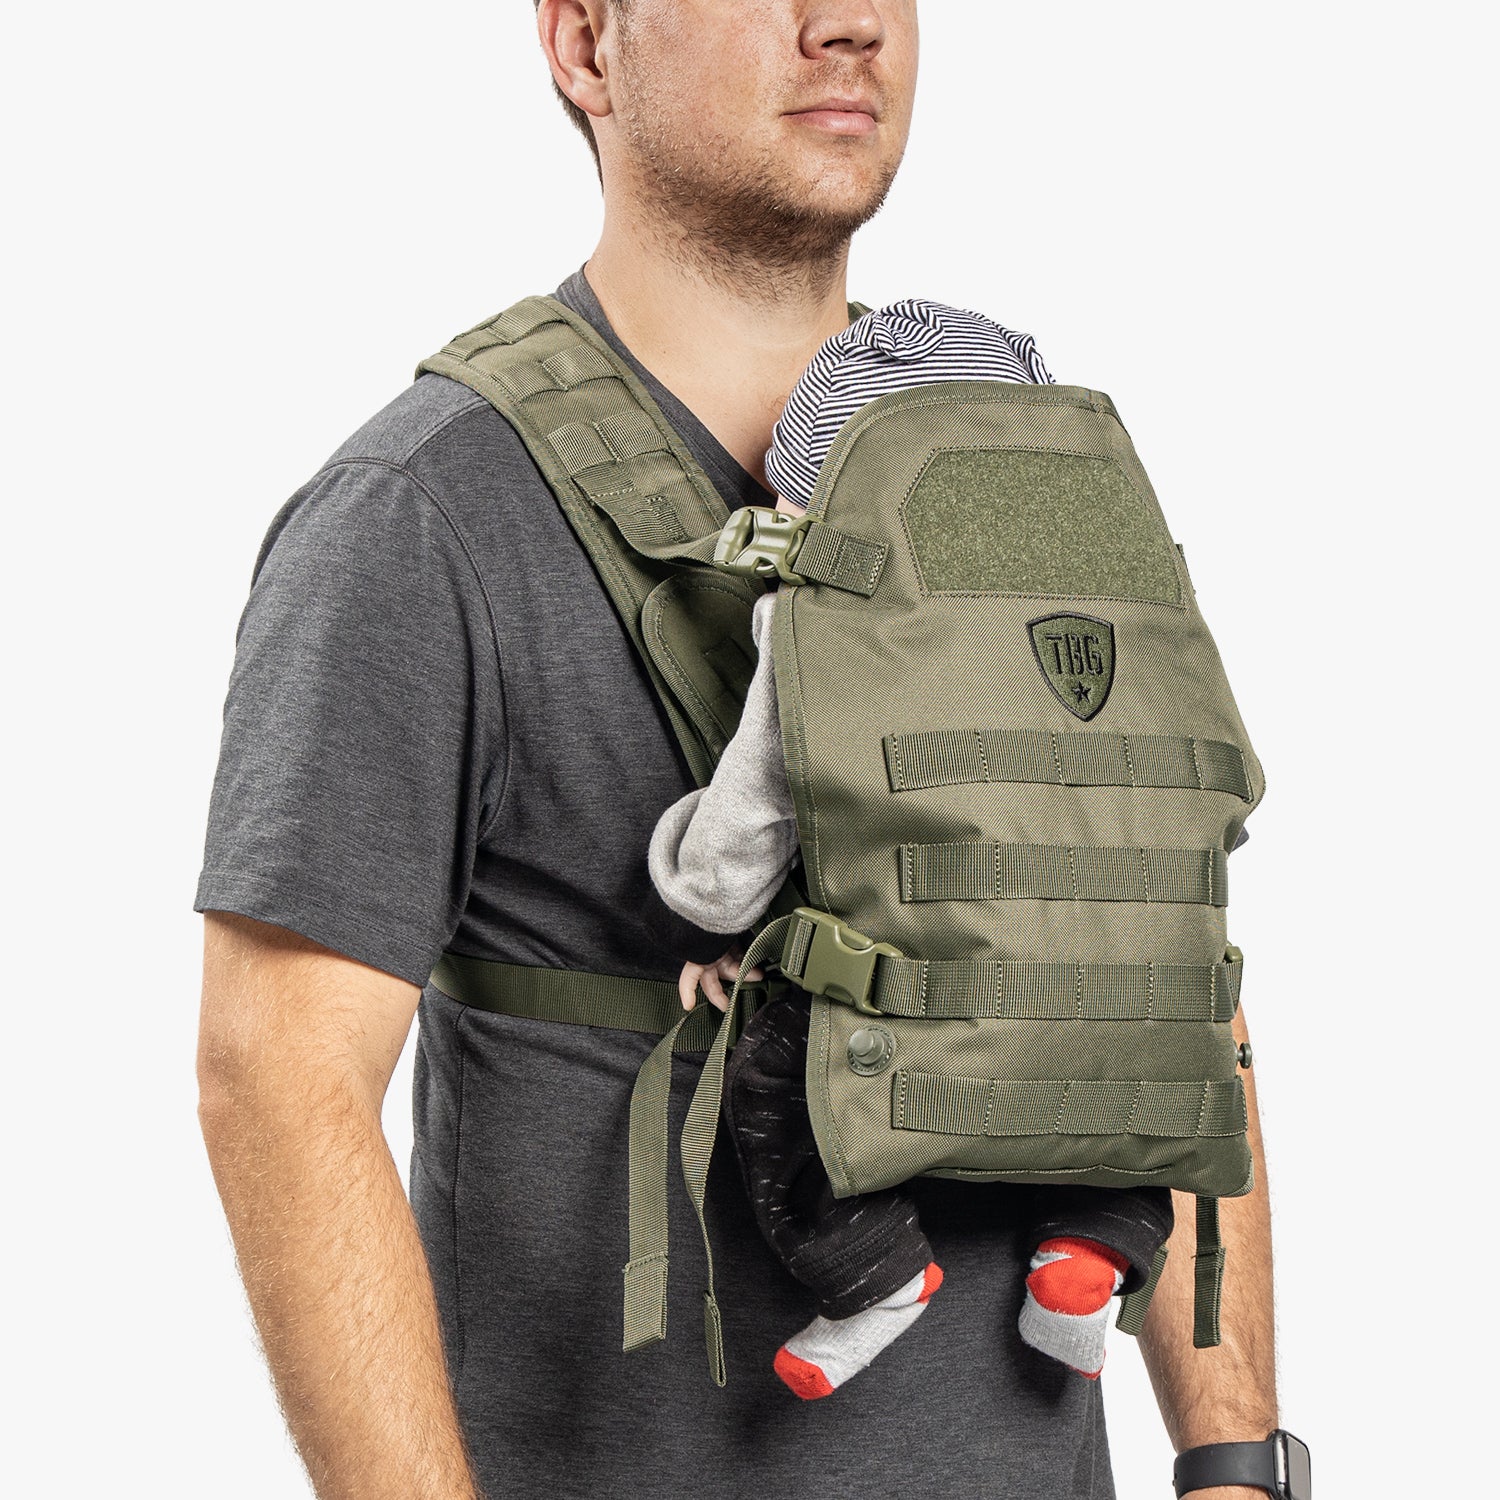 tactical gear baby carrier